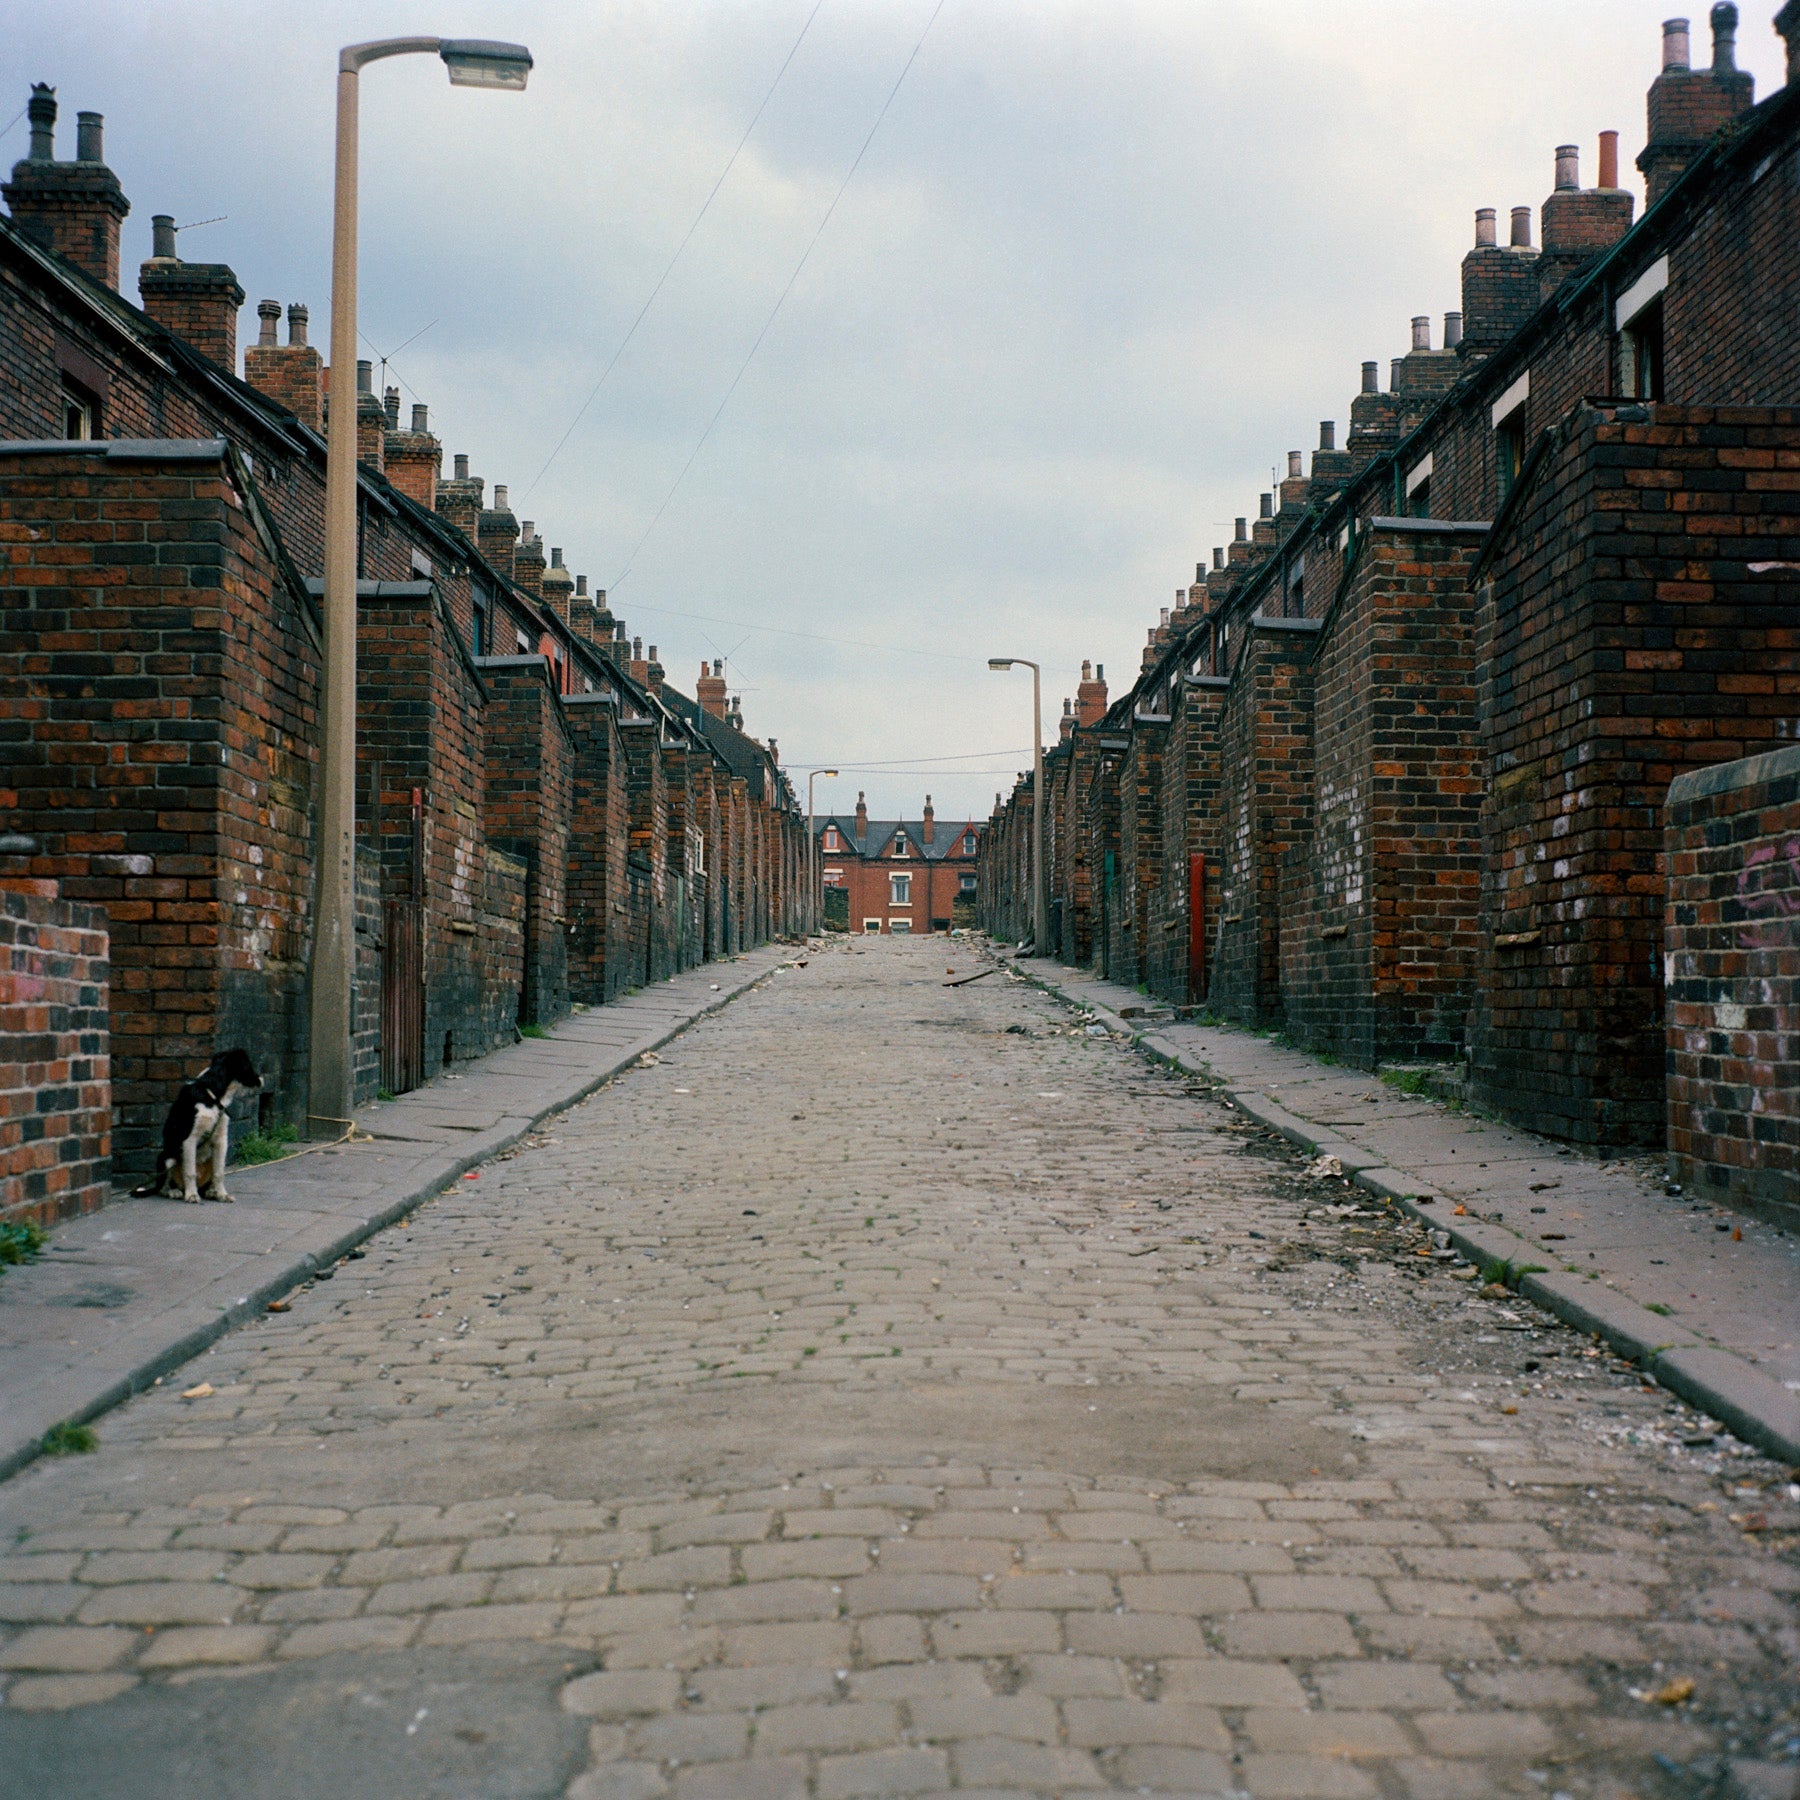 'Walking up to Armley Baths', Stanley View, Leeds, 1970s  - 7x9" Print